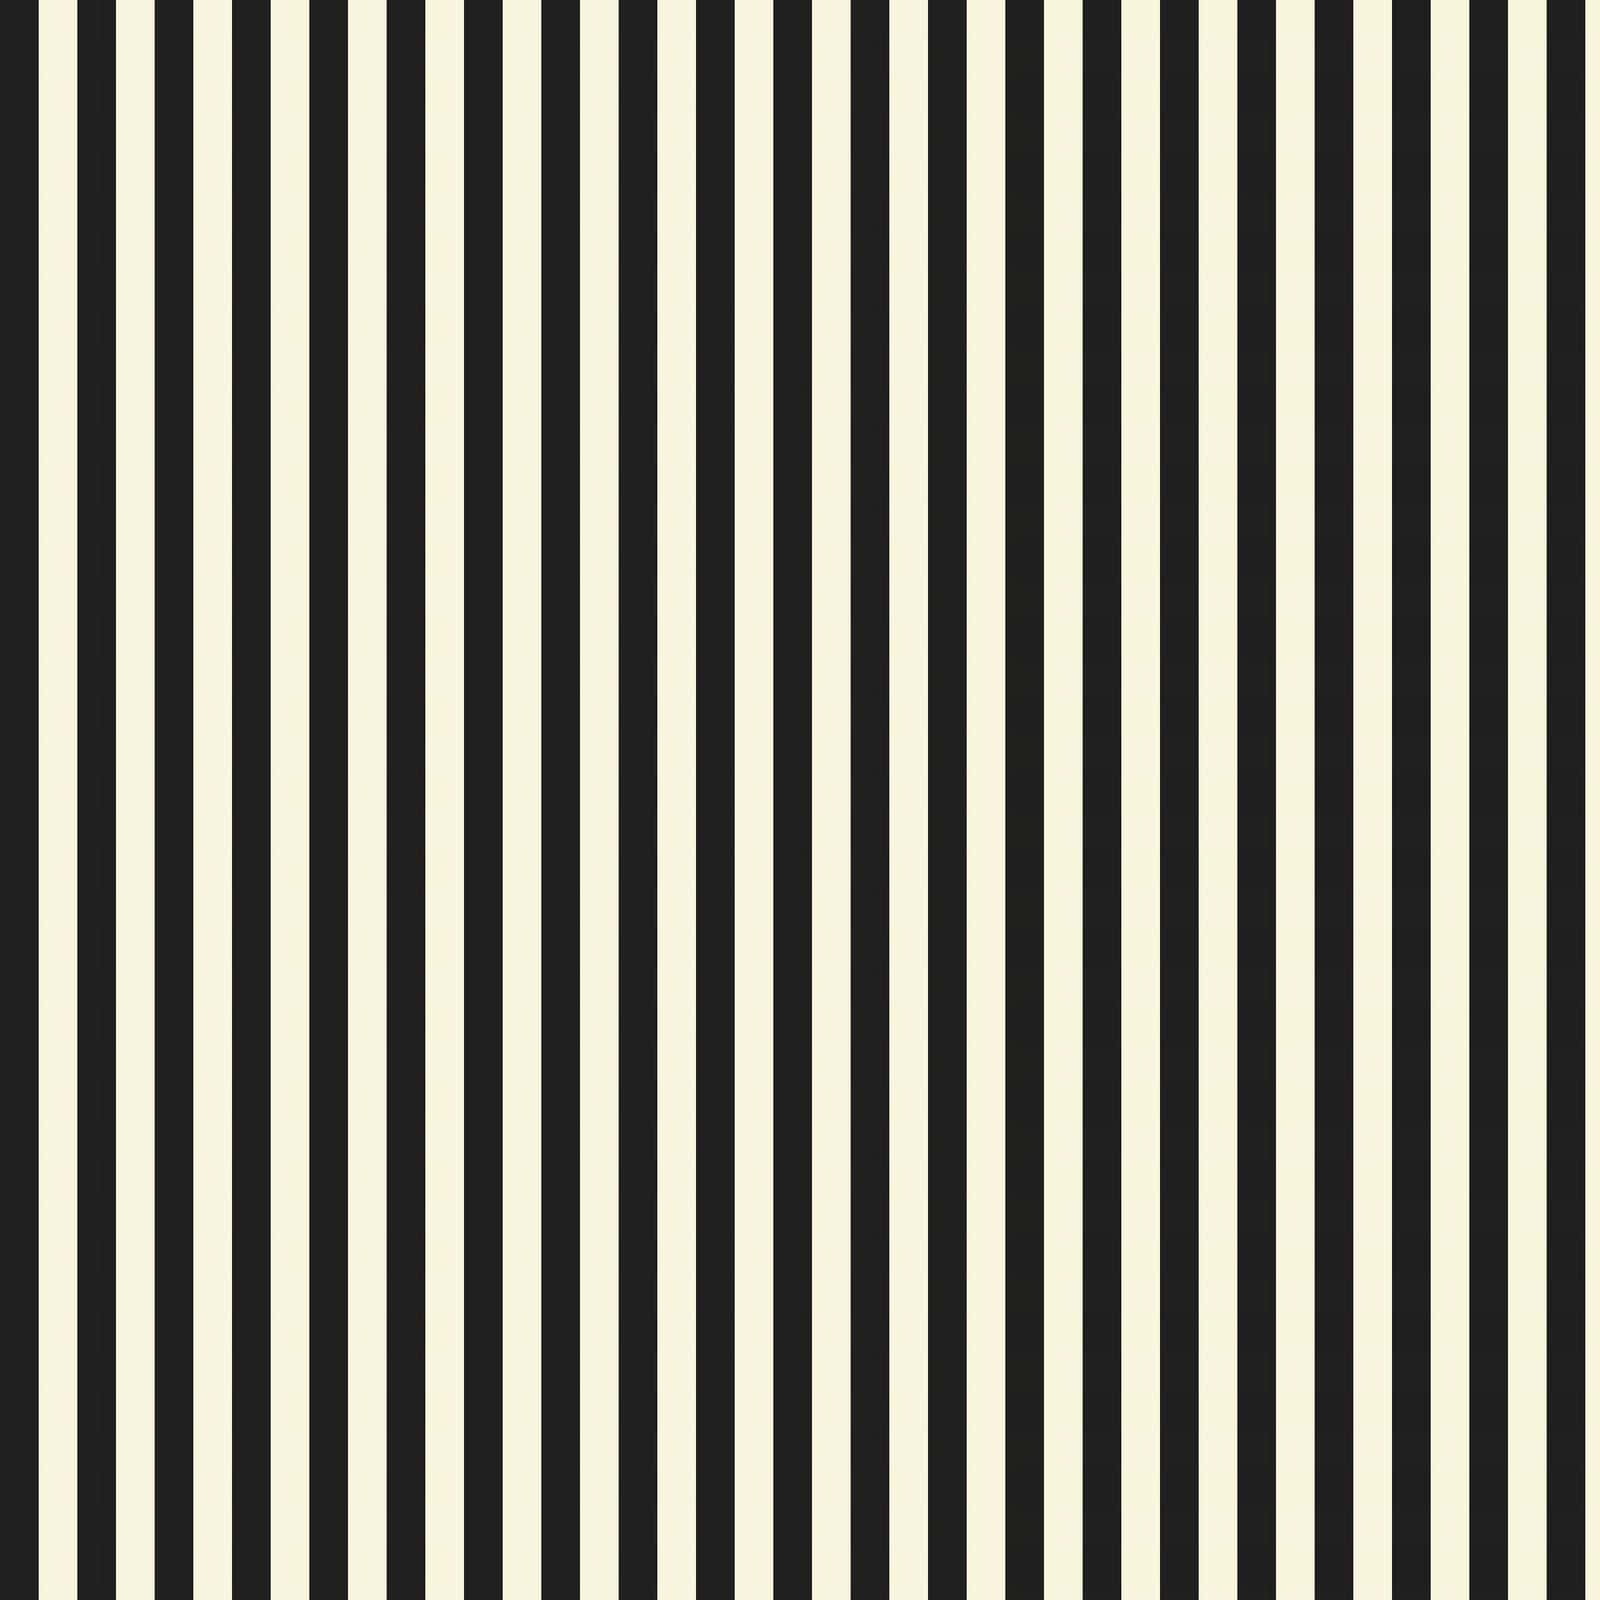 Download Black And White Striped Background 1600 X 1600 | Wallpapers.com